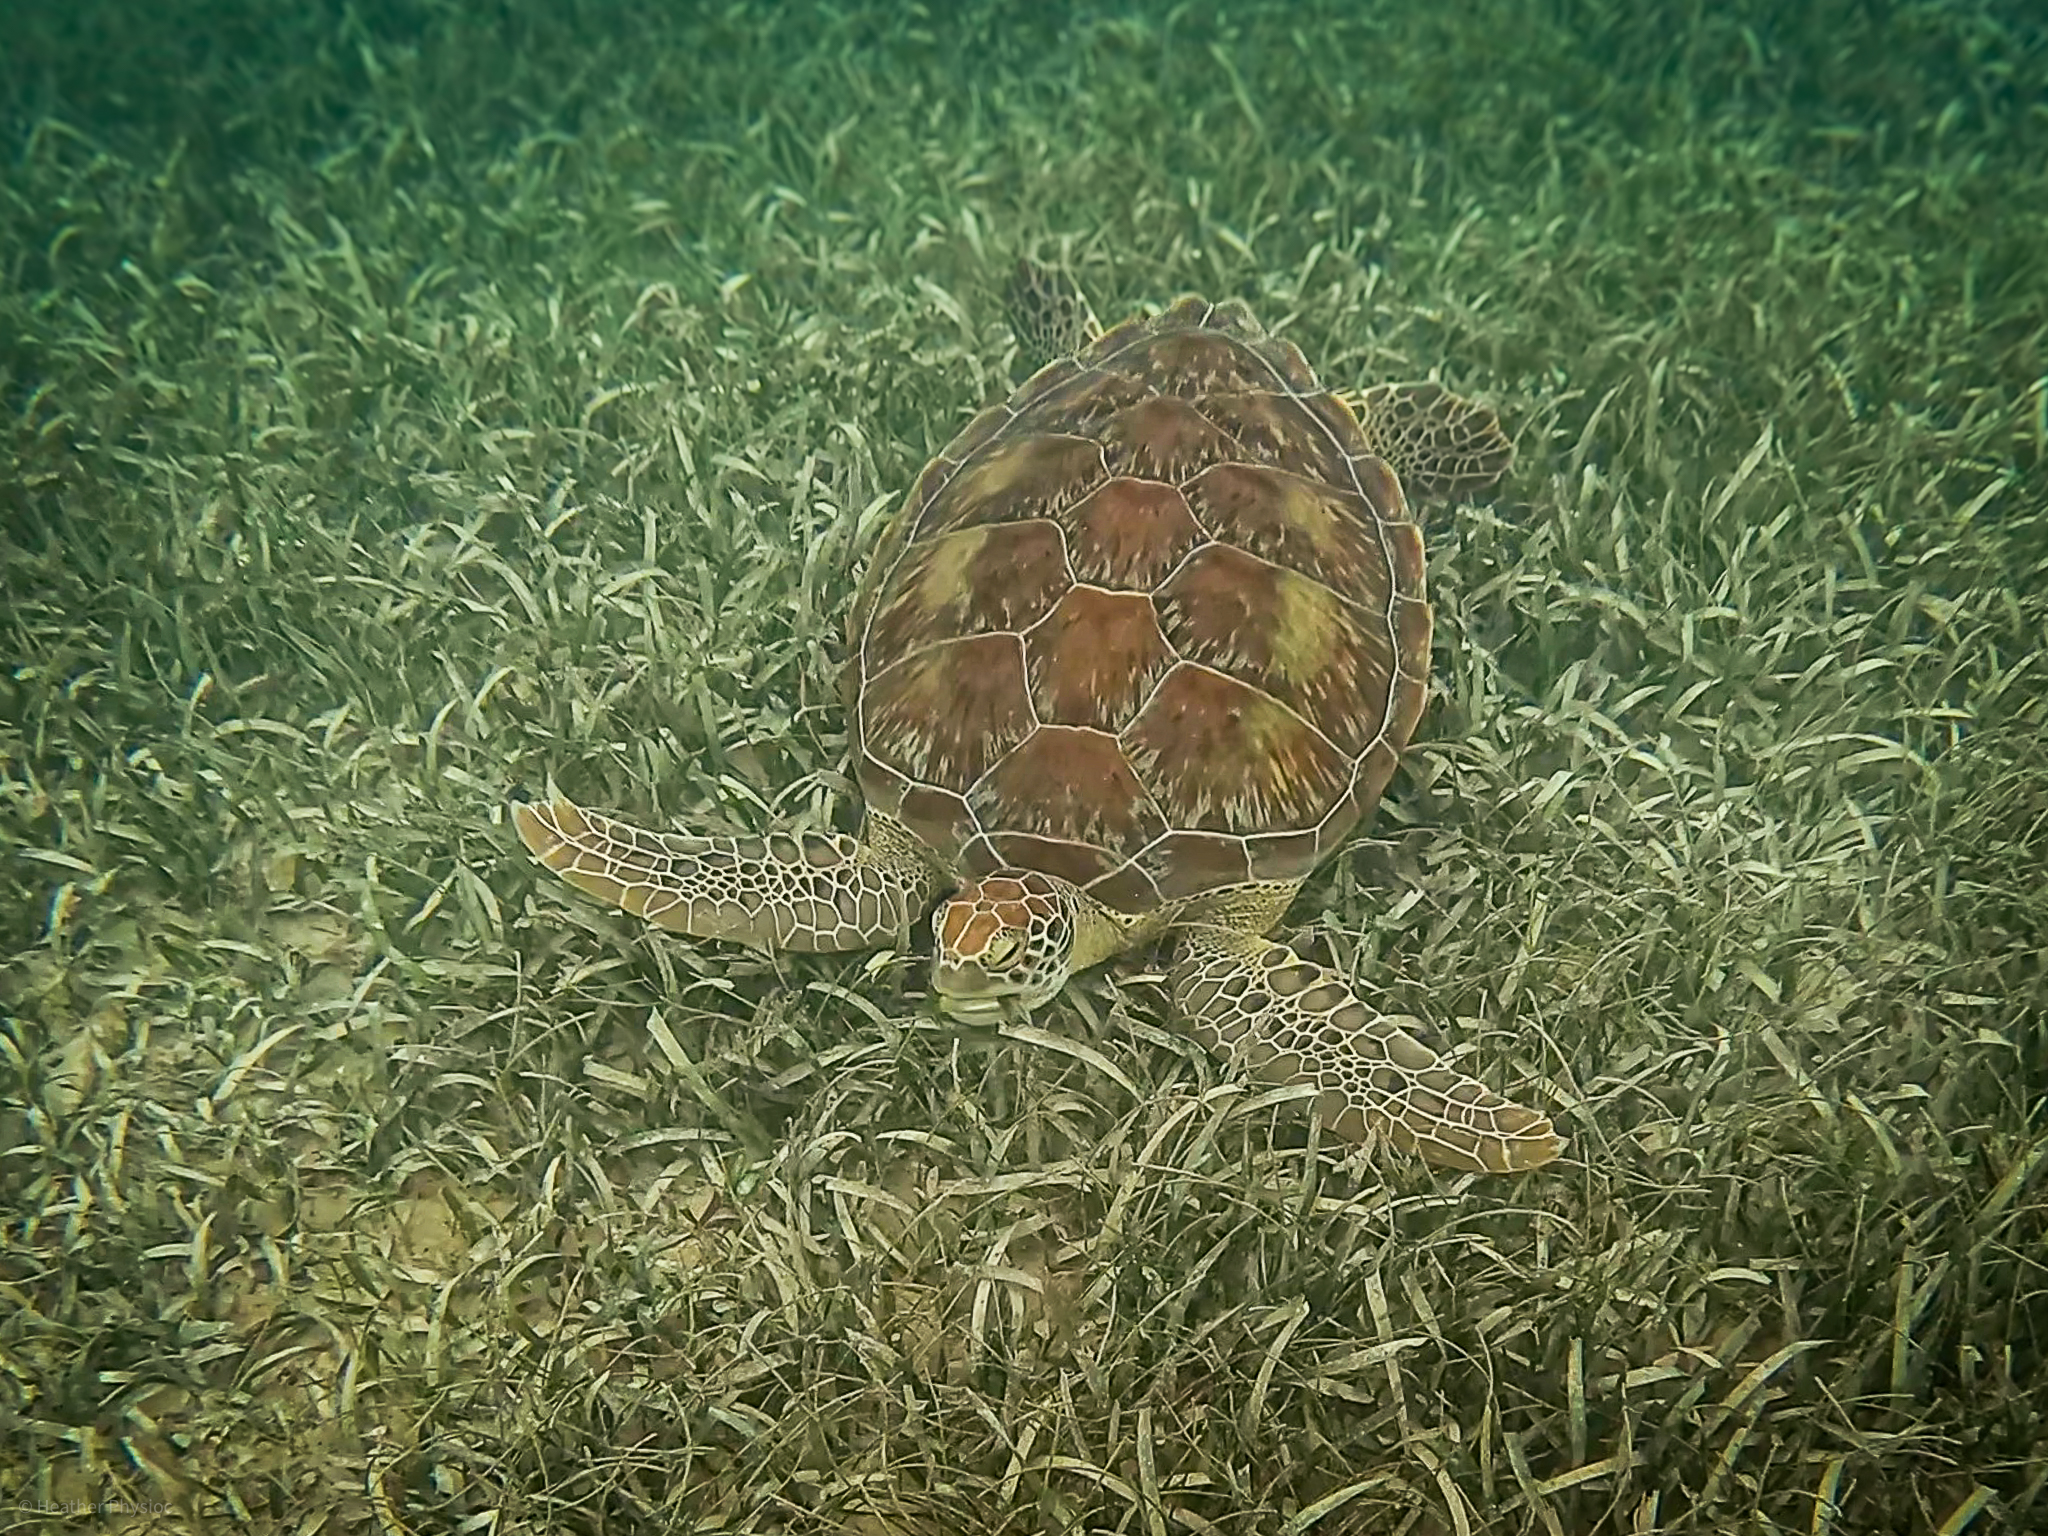 A green sea turtle grazing on sea grass on the sandy ocean floor of Akumal Bay, offering a glimpse into the marine life of the Yucatan.